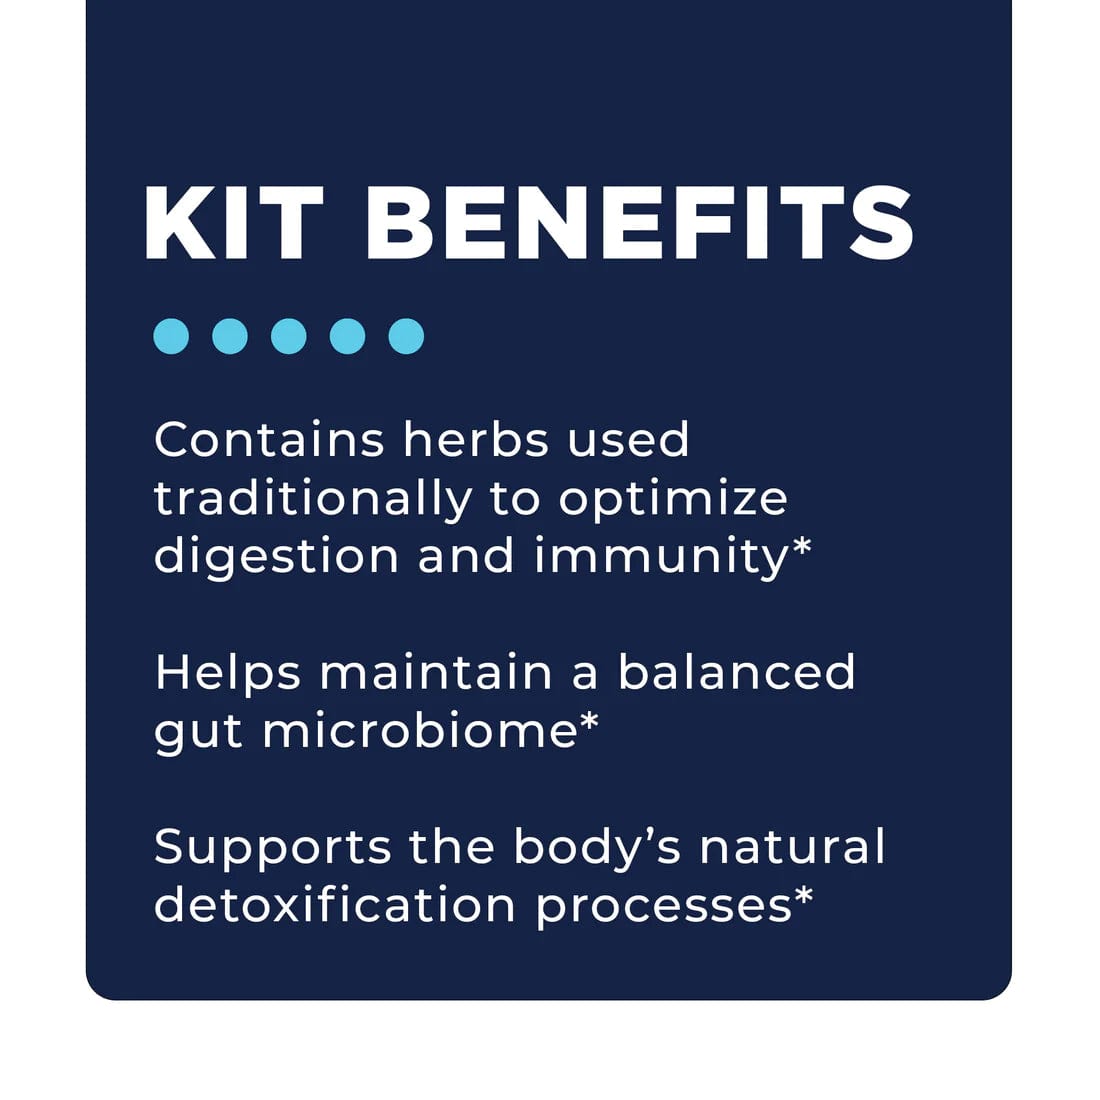 CellCore Biosciences Nutritional C.A. Support Kit by CellCore Biosciences